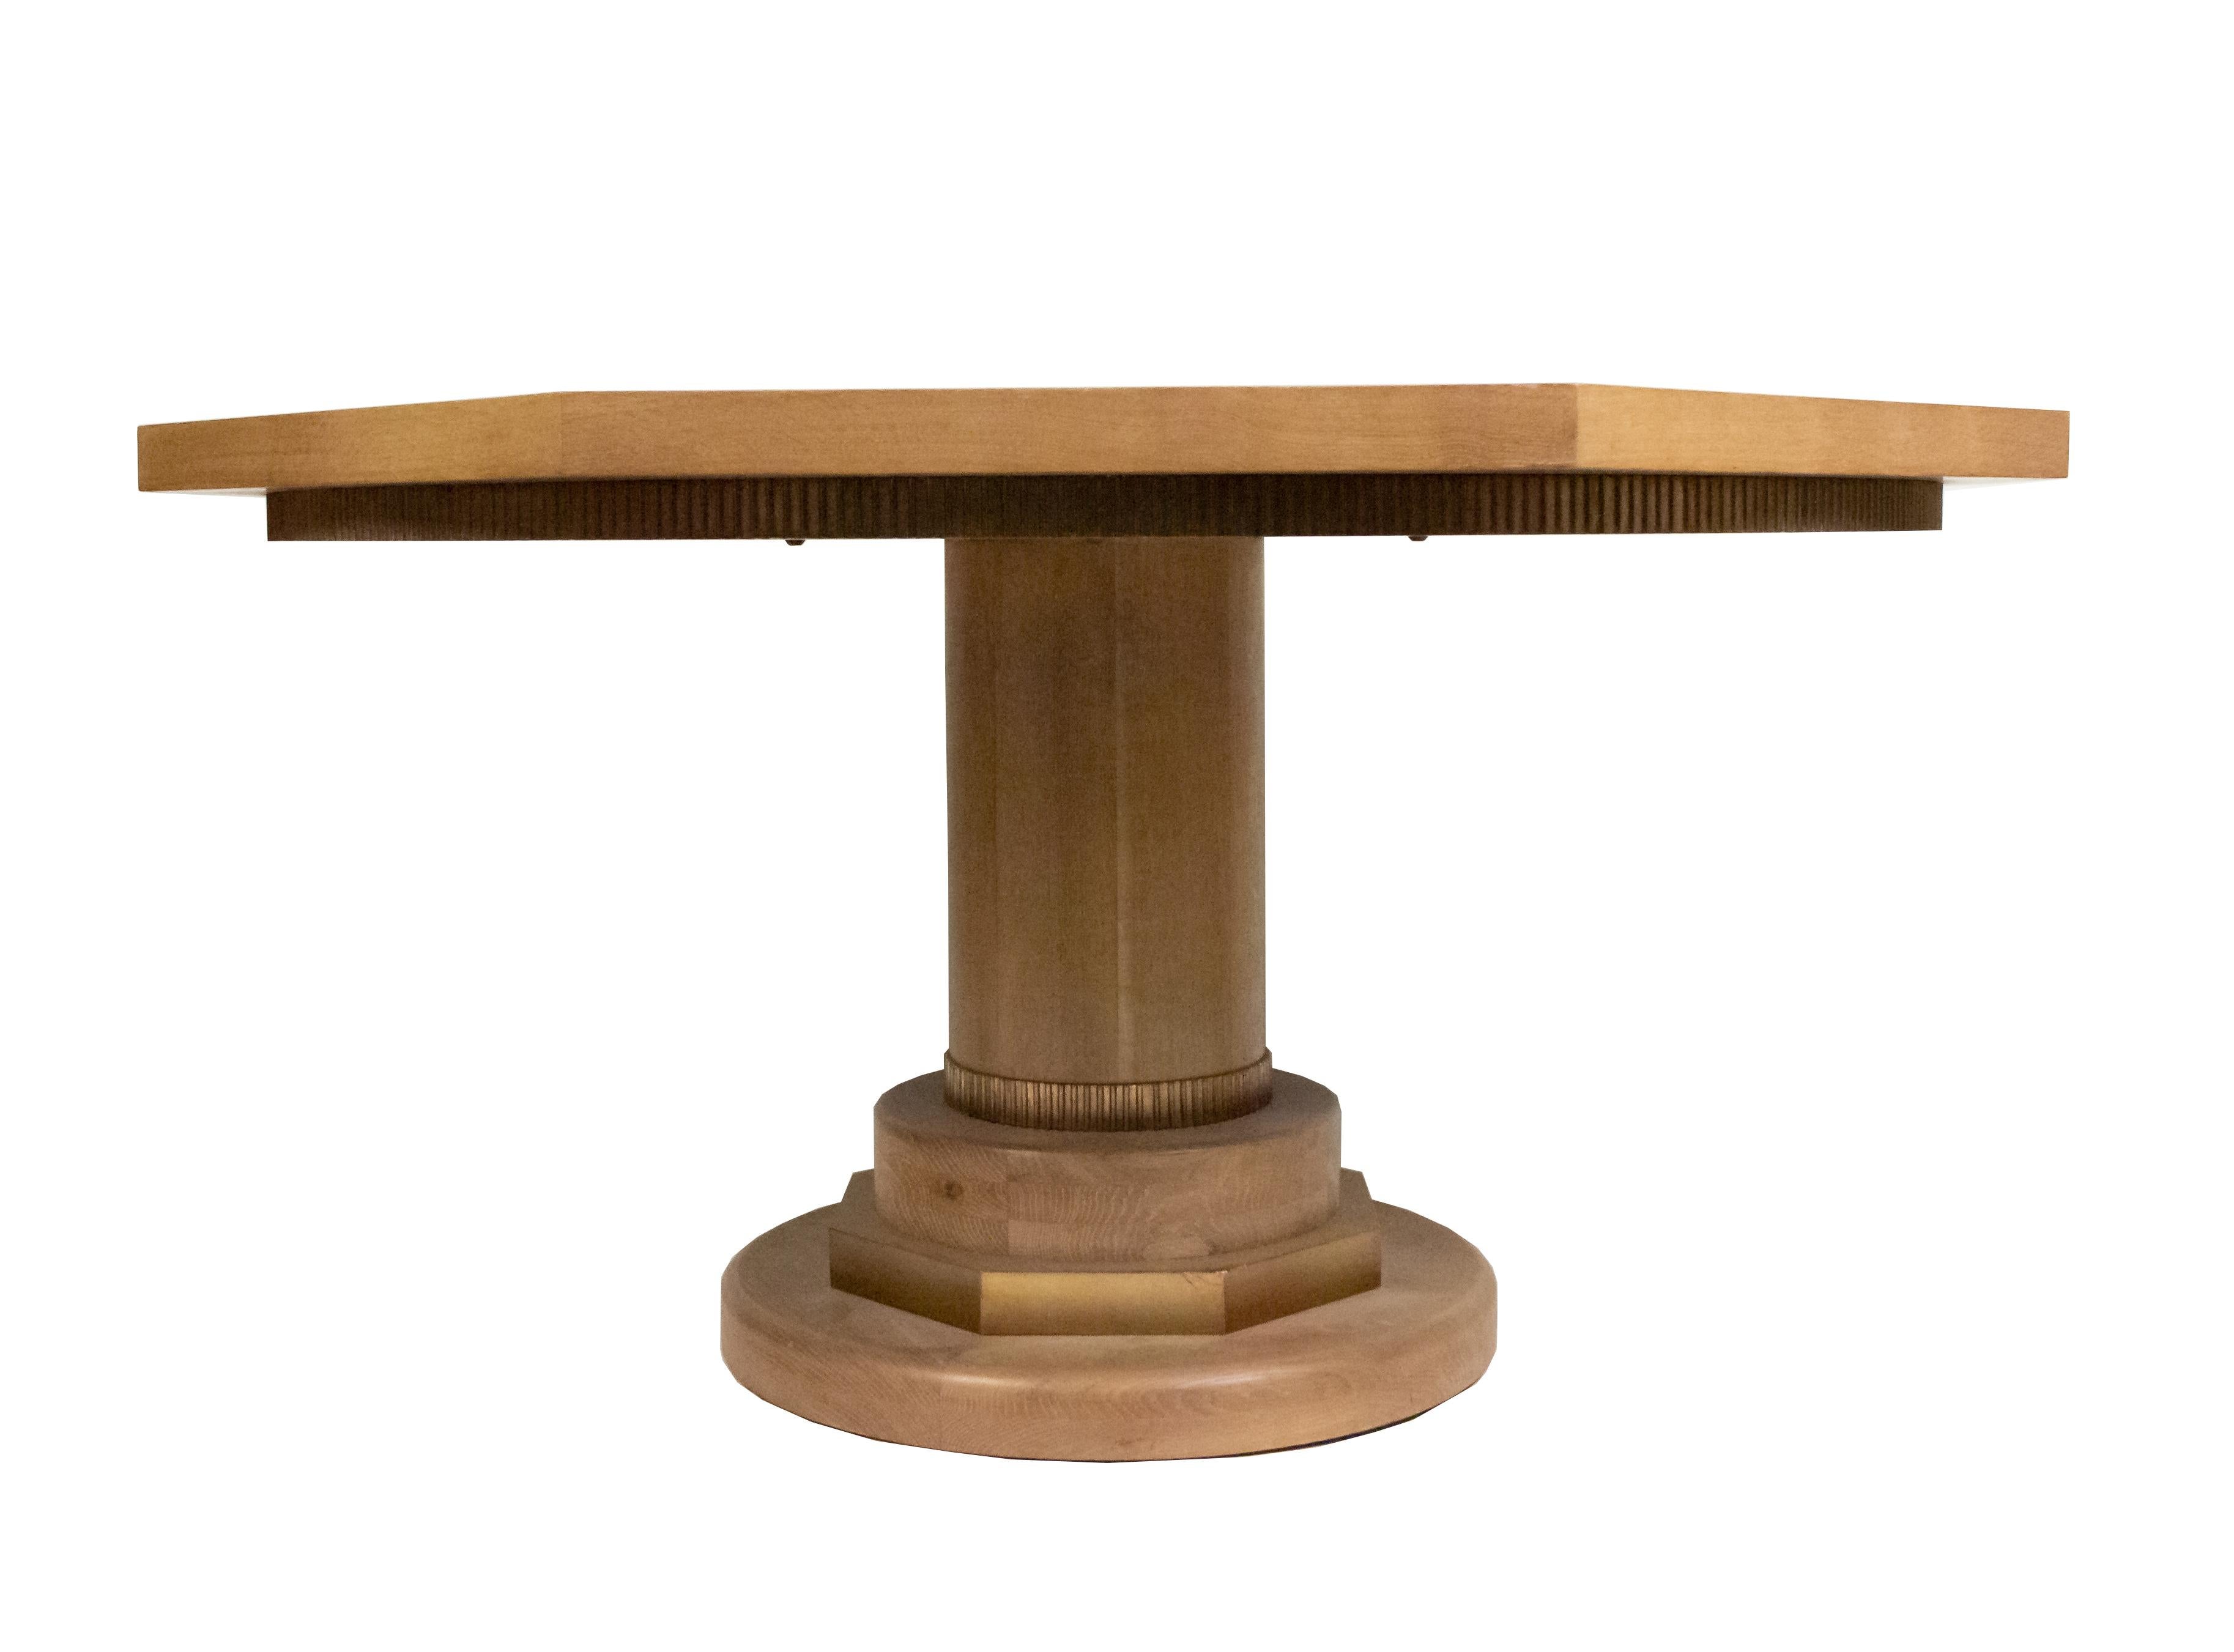 Midcentury cerused oak pedestal base center / dining table having a round octagonal top with a fluted edge and dark wood and metallic insets.